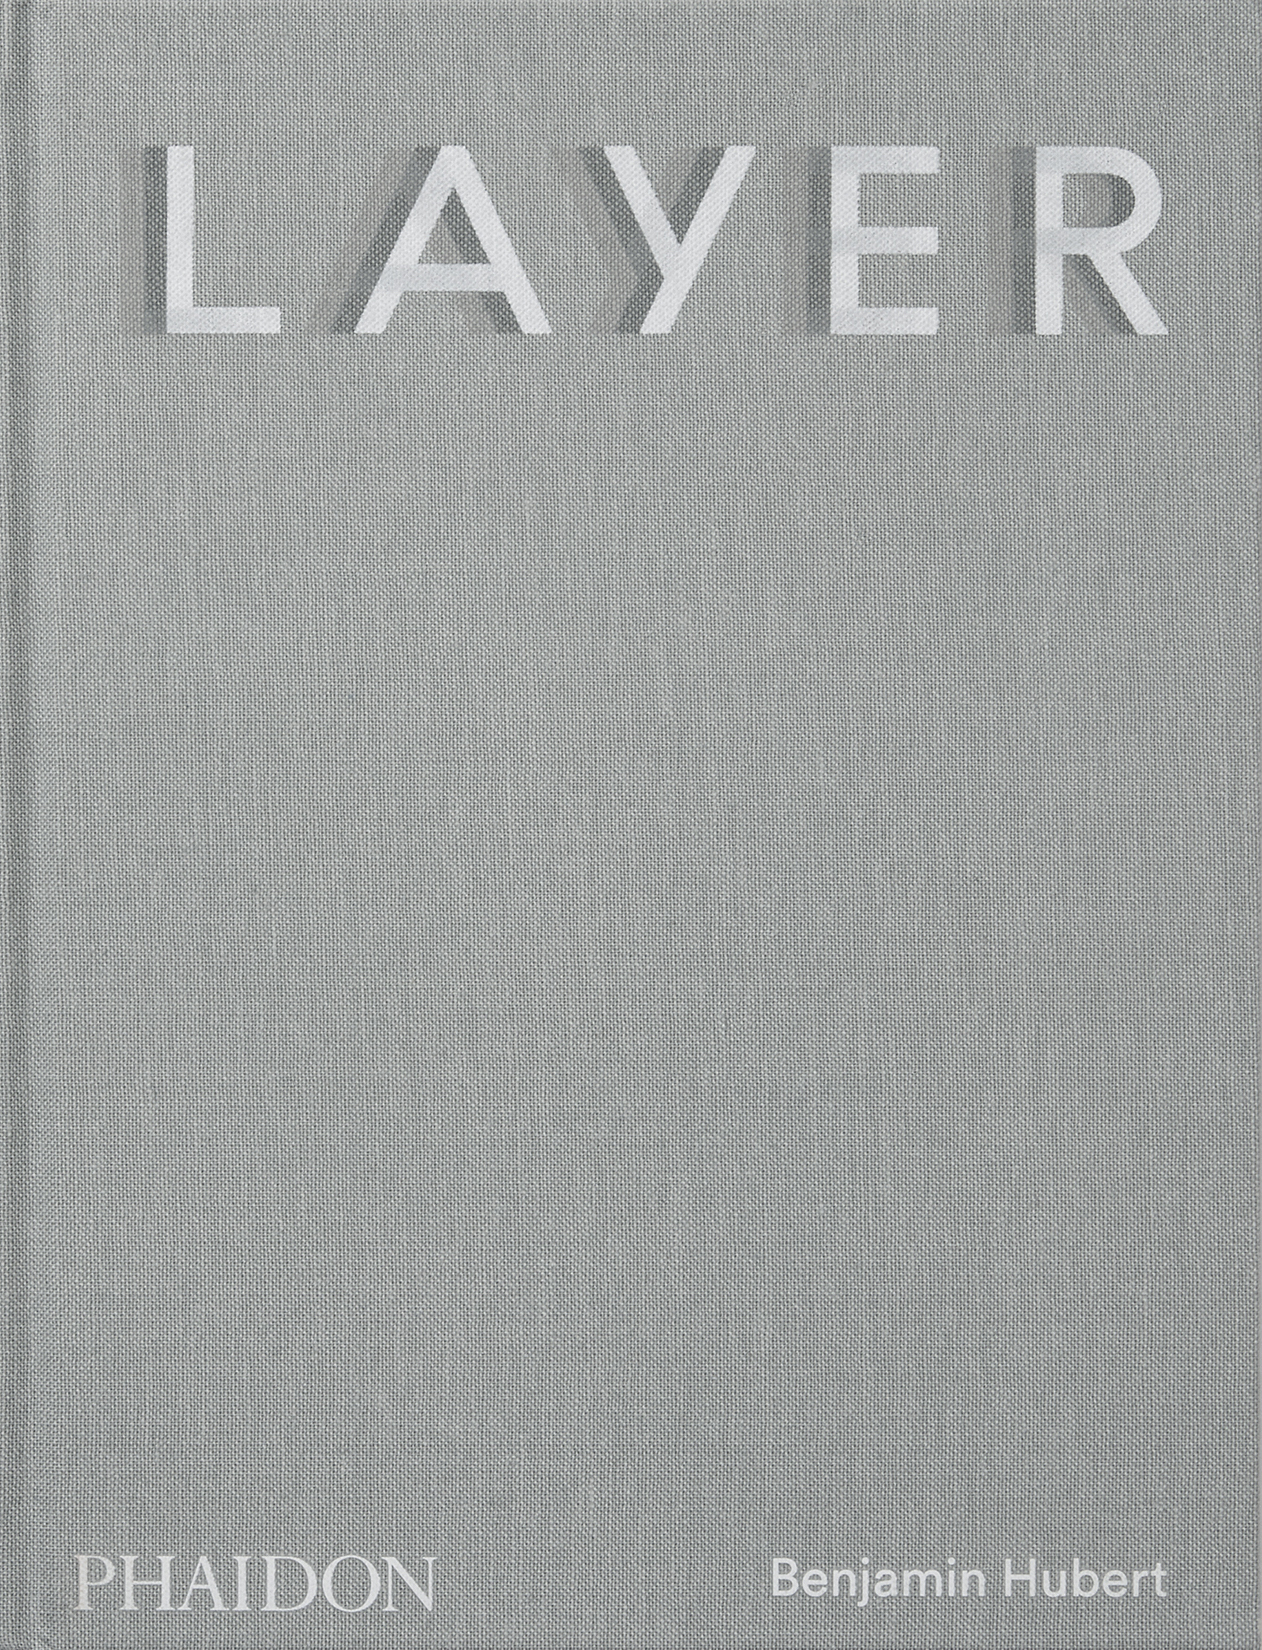 LAYER by Benjamin Hubert published by Phaidon. -Effect Magazine